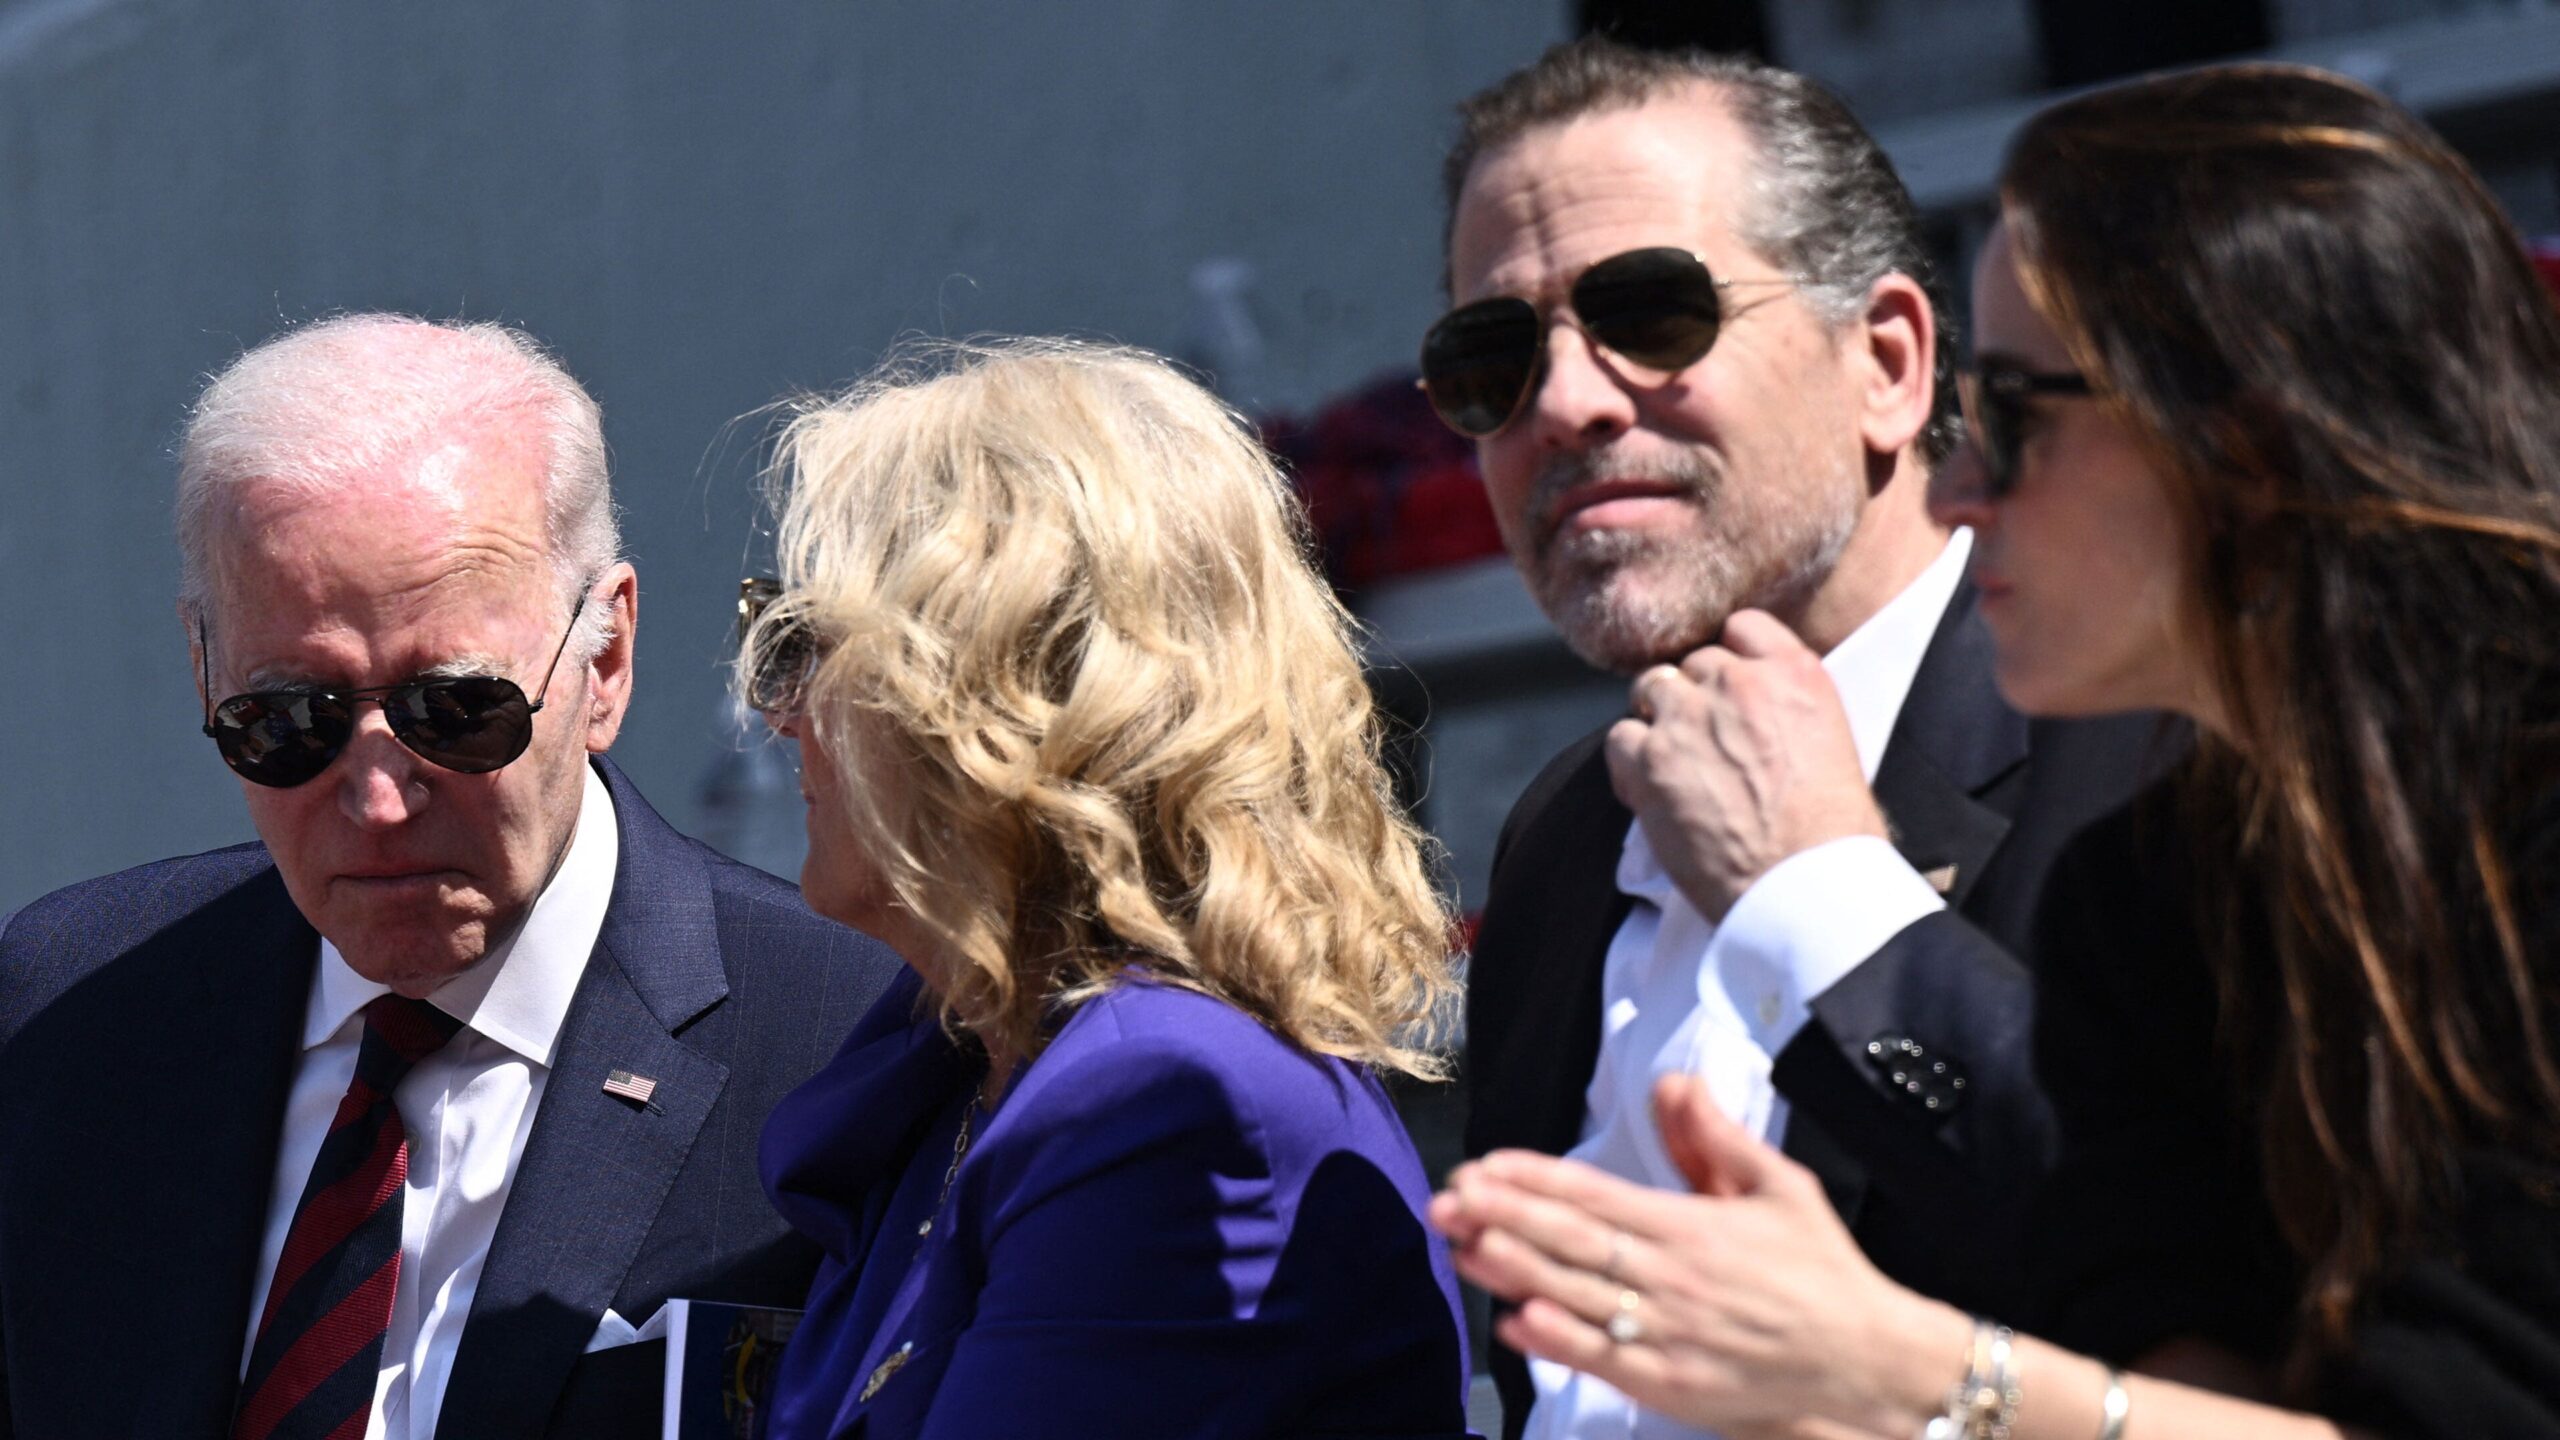 Hunter Biden case move to Los Angeles may be evidence the feds ‘found something’: Dershowitz